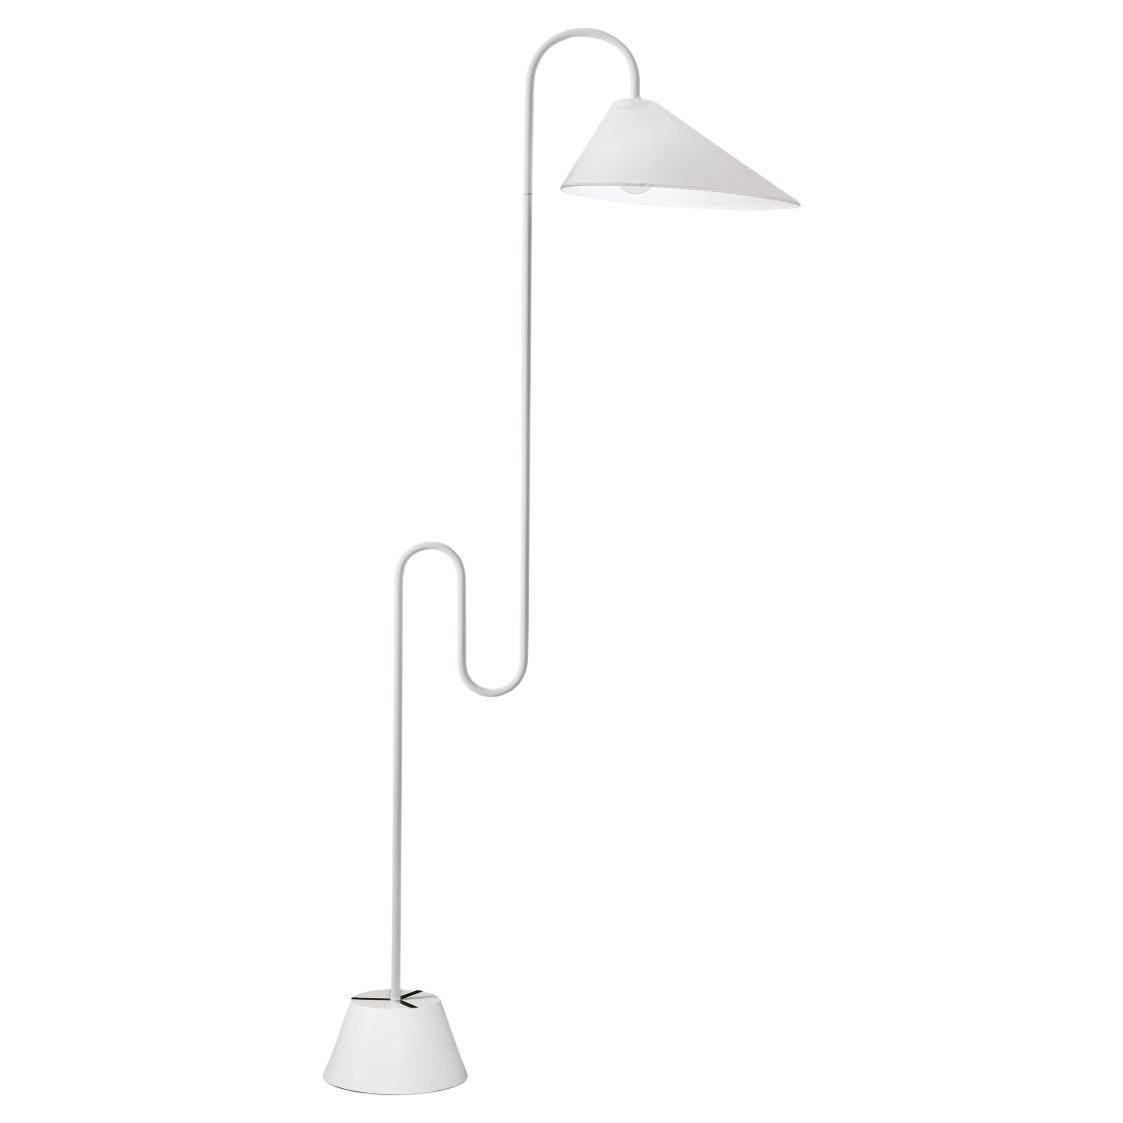 ClassiCon Roattino White Floor Lamp by Eileen Gray For Sale